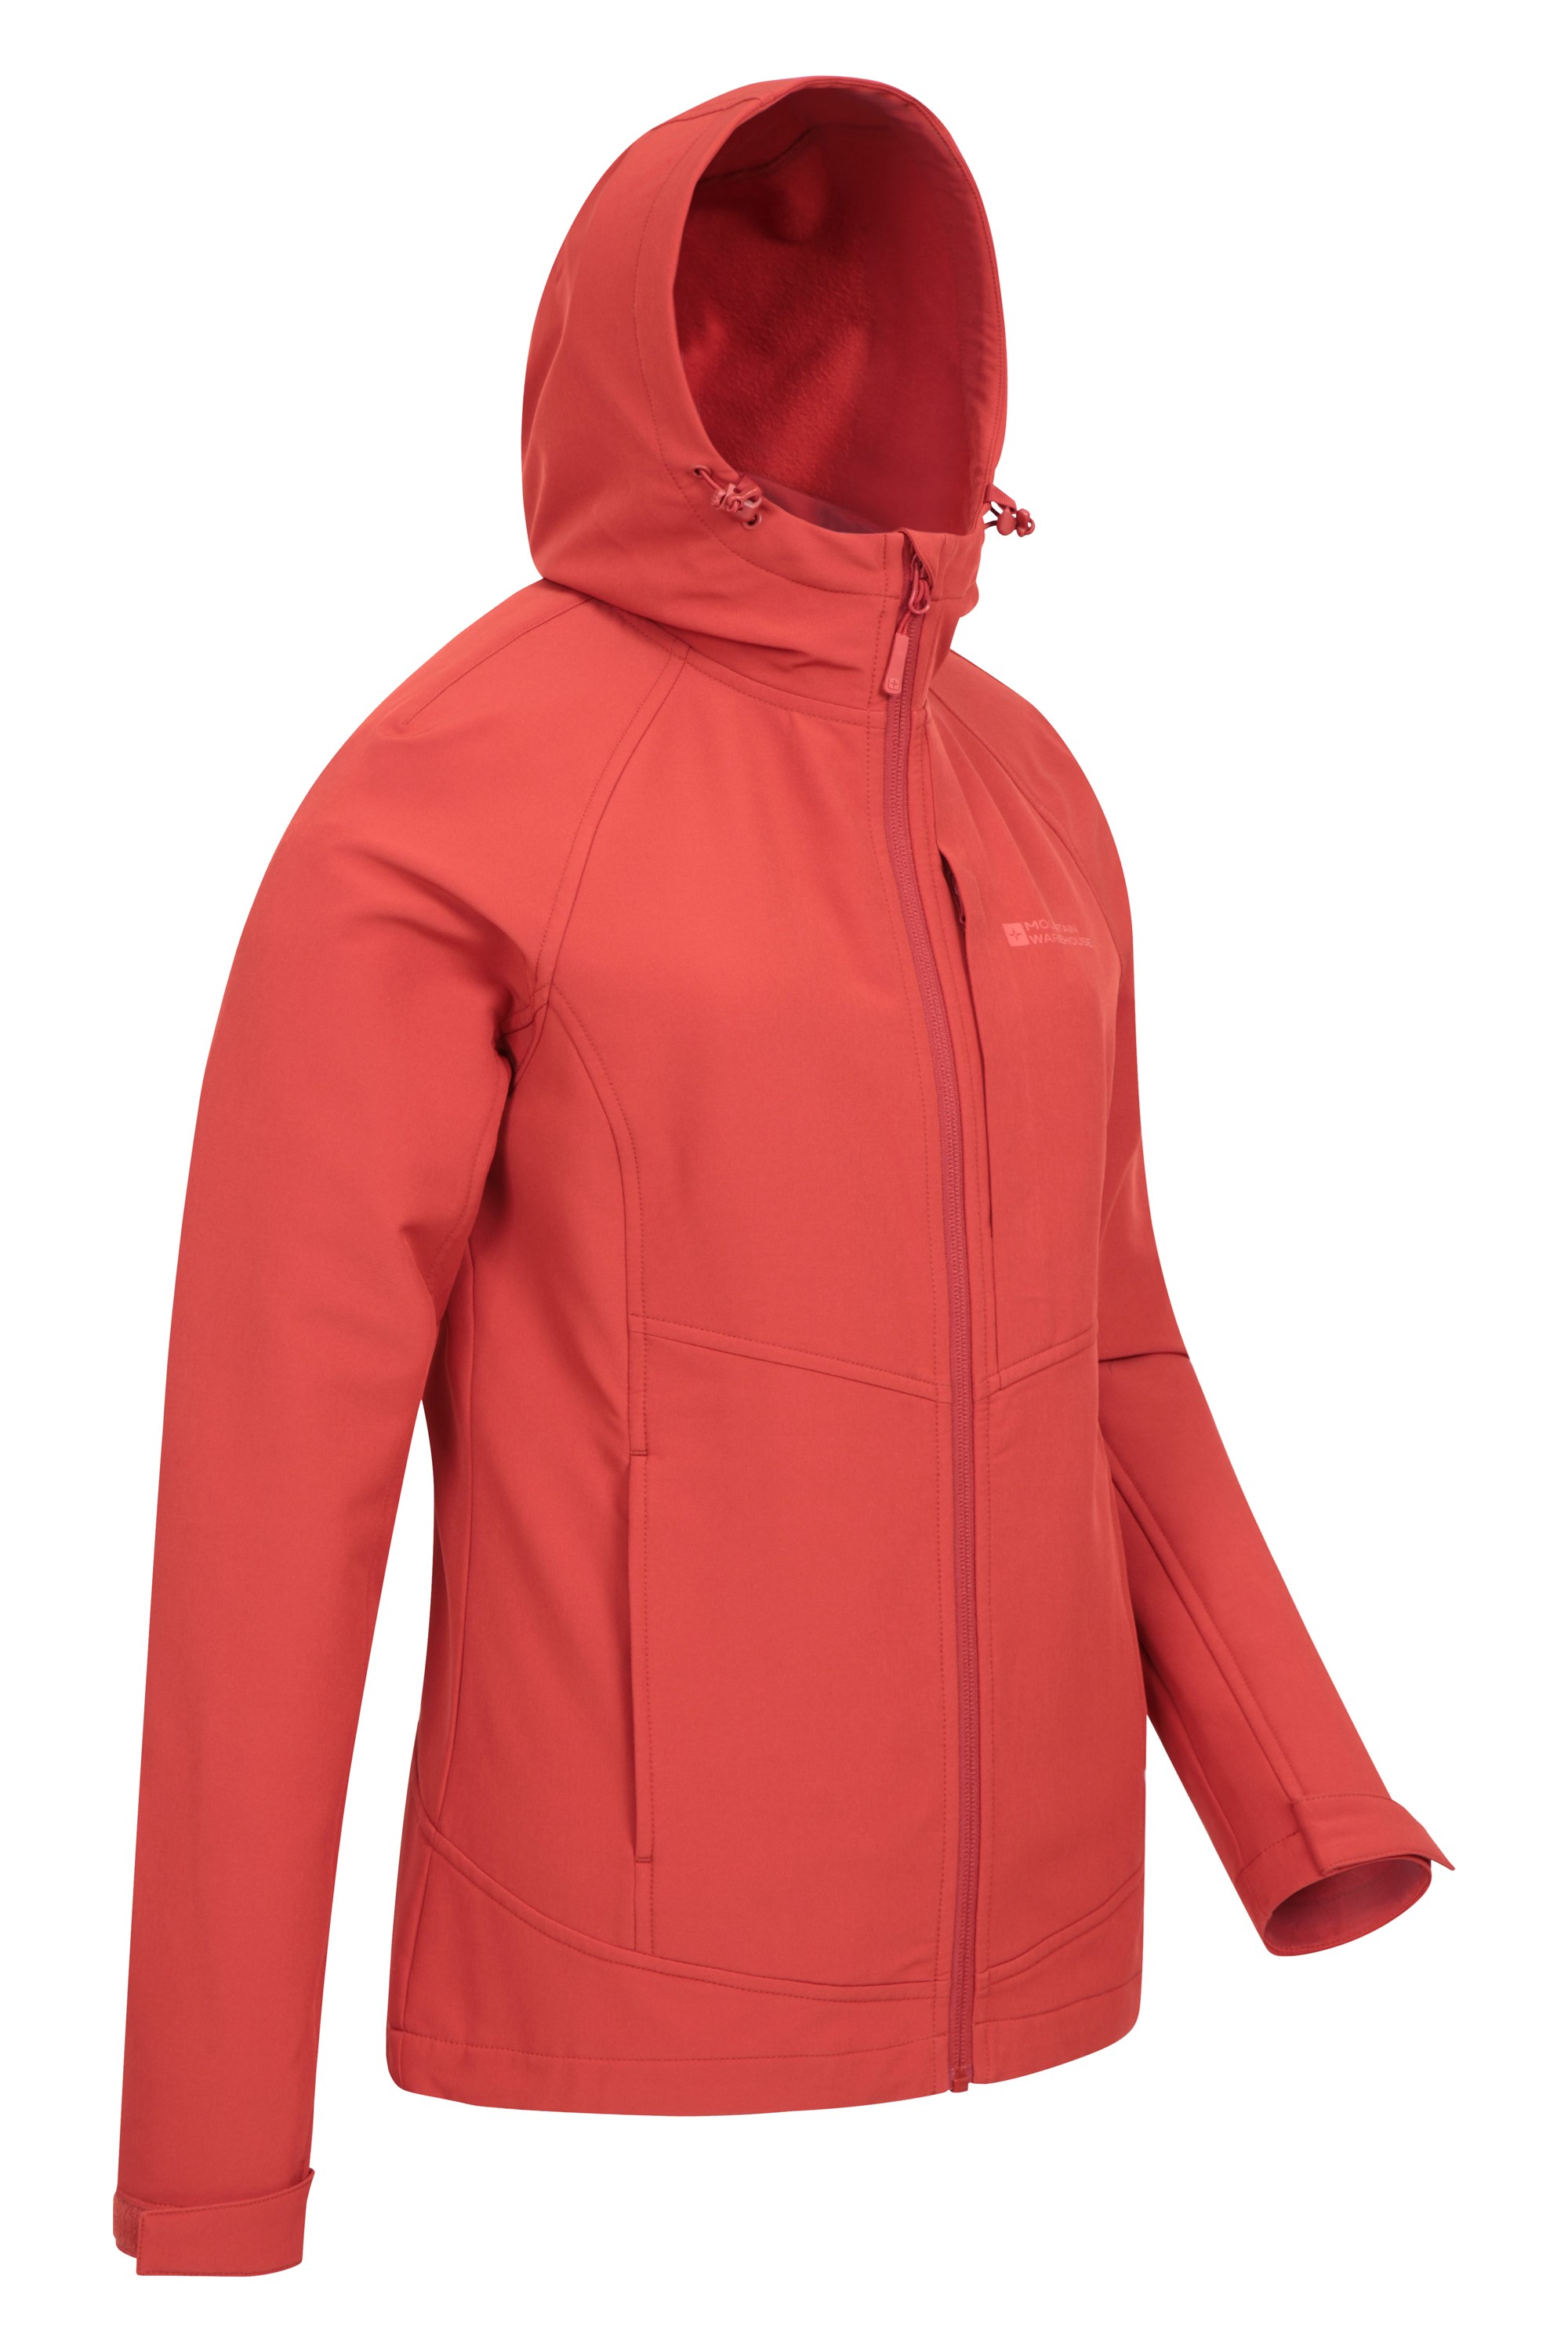 Canyan Womens Water-Resistant Softshell Jacket | Mountain Warehouse US